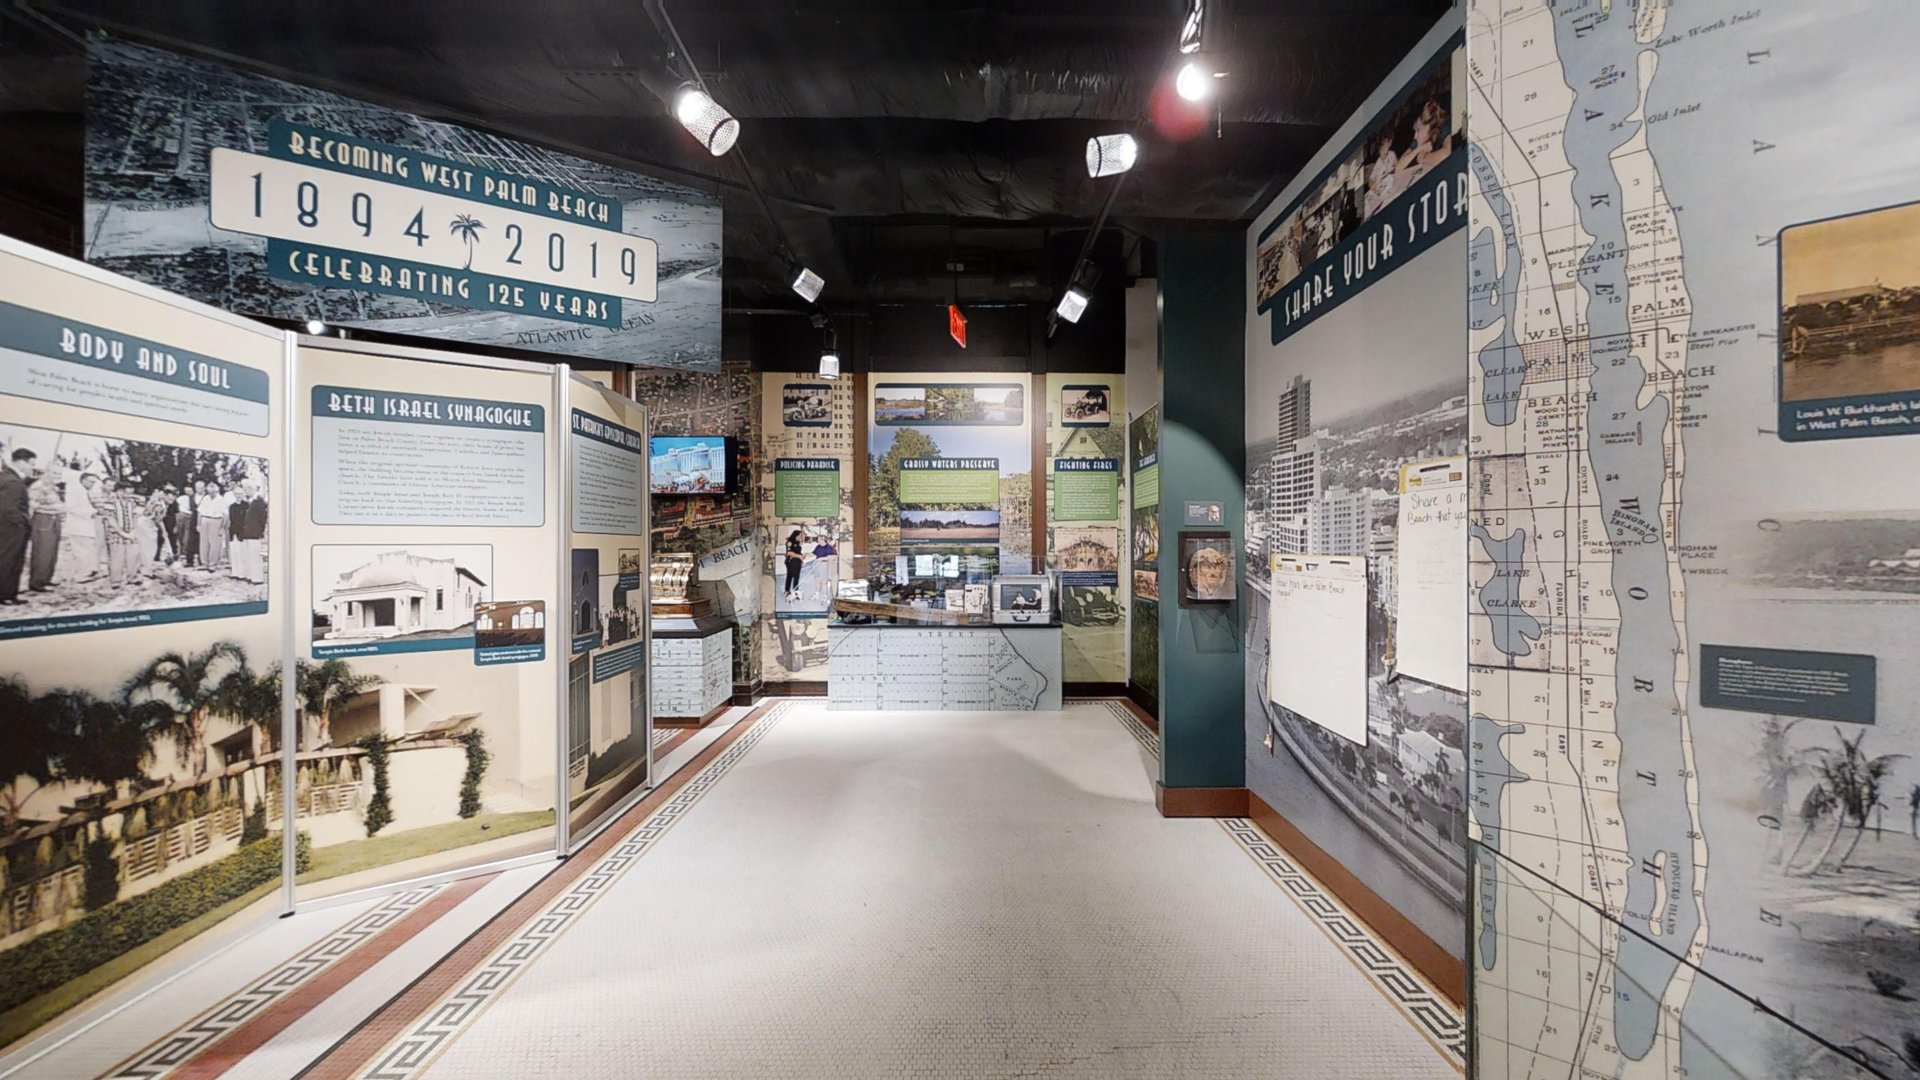 Immersive Spaces 3D Virtual Tour of Becoming West Palm Beach: Celebrating 125 Years